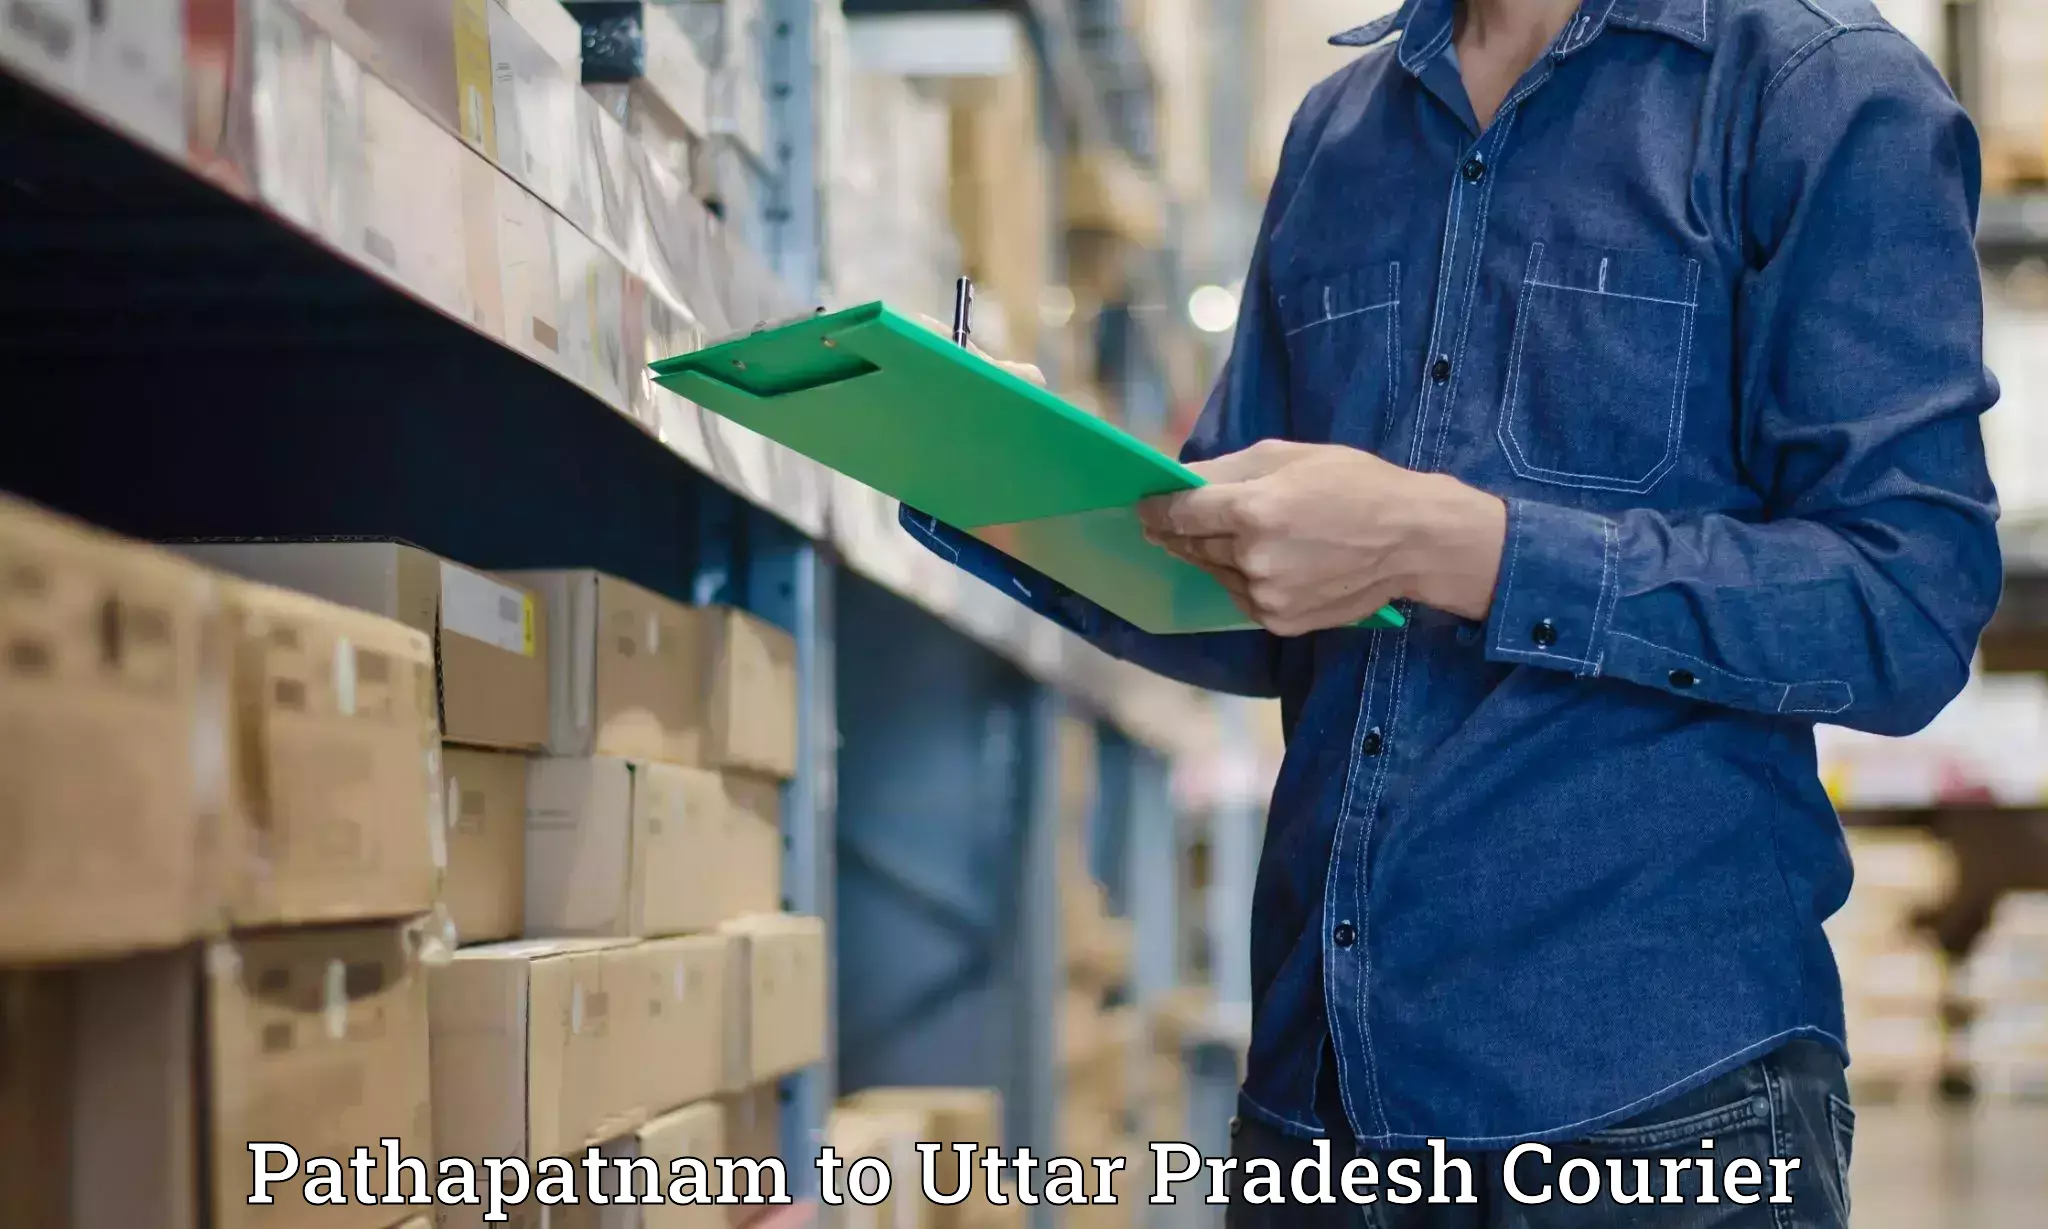 Quality courier partnerships Pathapatnam to Noida